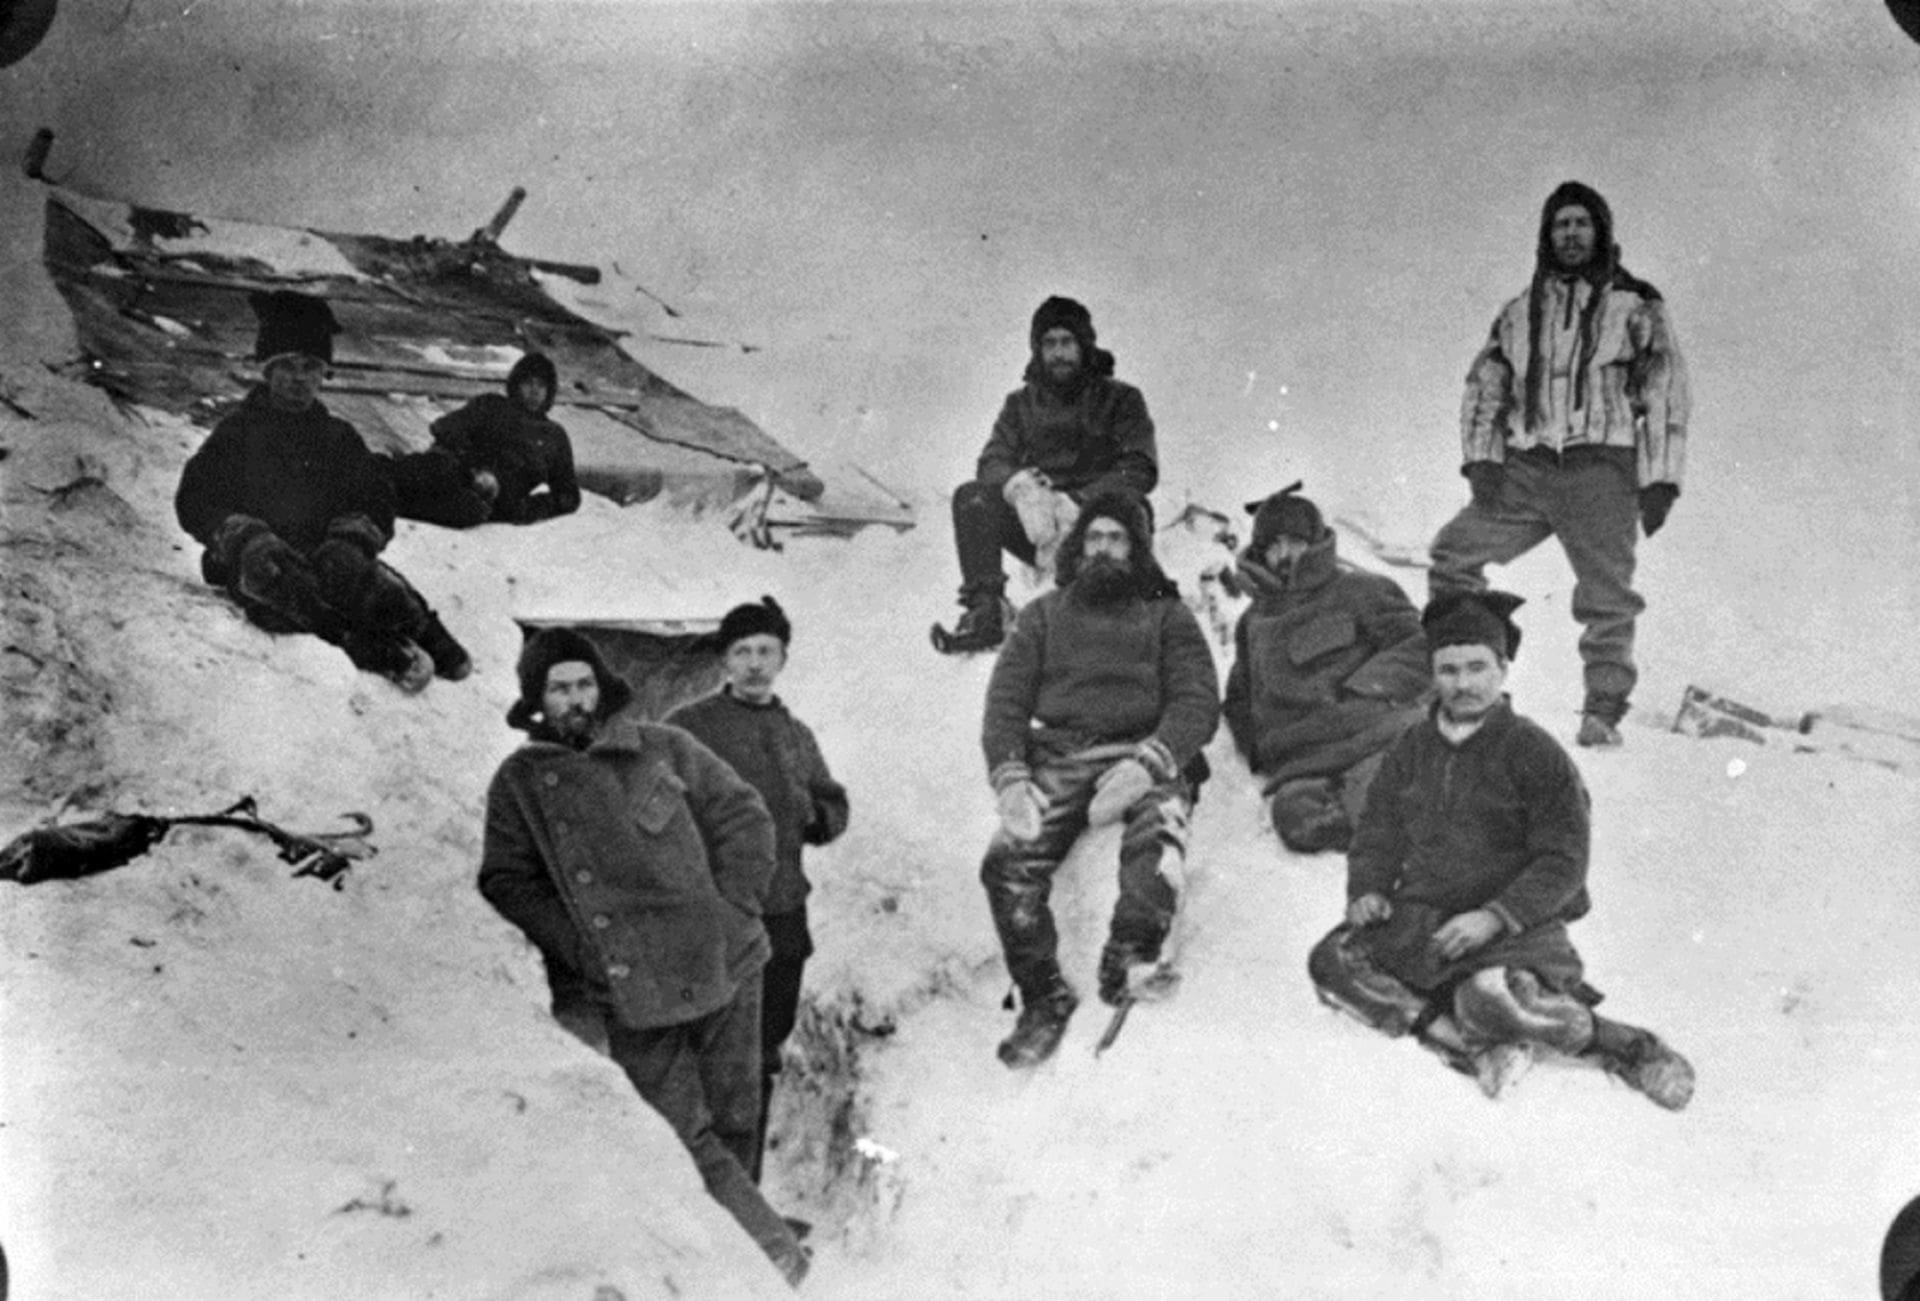 The expedition members pictured just before spending the first winter on the Antarctic continent, 1899.